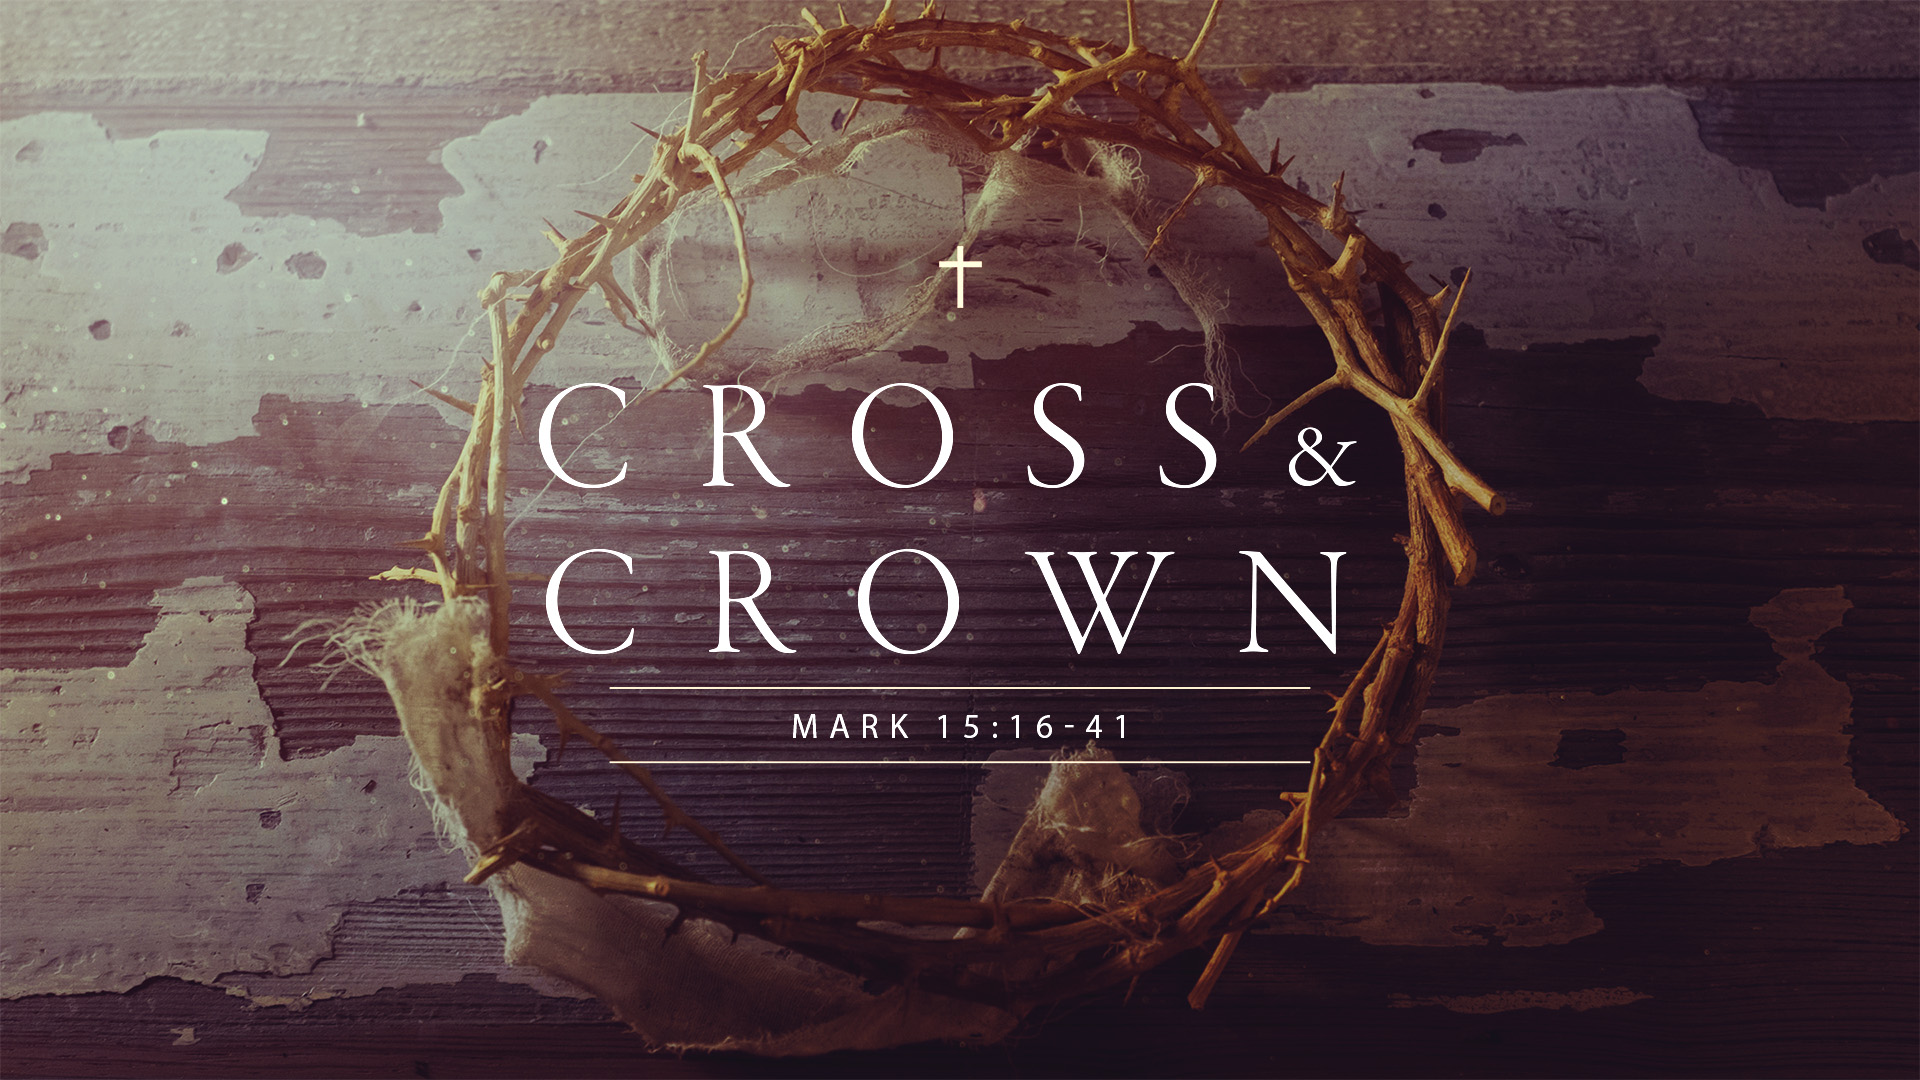 The Crown and Cross